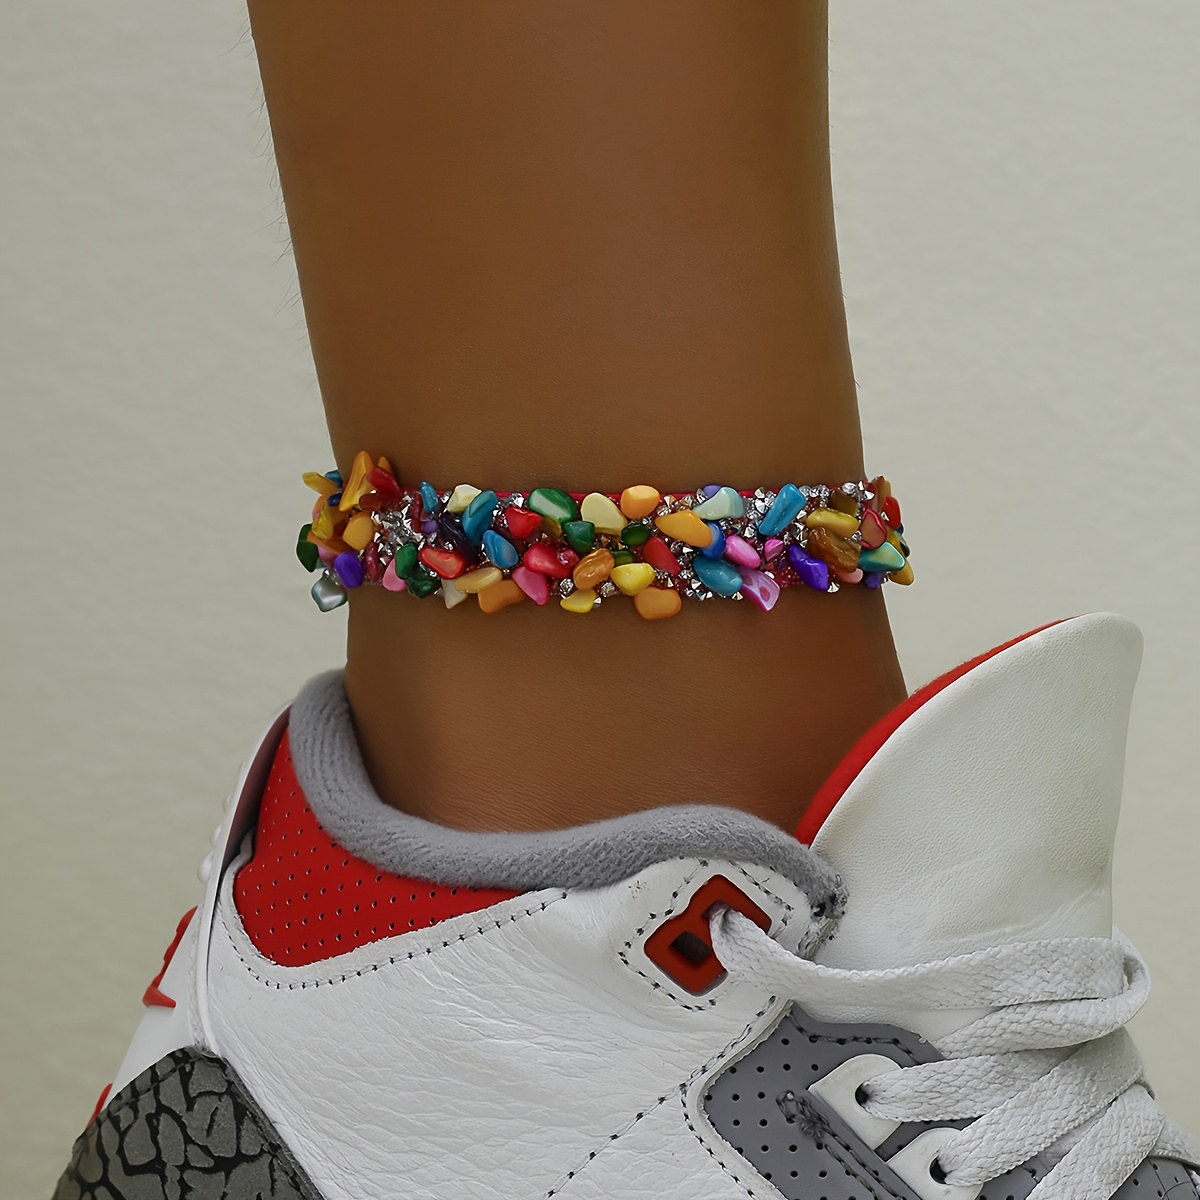 

1 Pc Delicate Shiny Anklet Embellished With Colorful Rhinestones Bohemian Ethic Style Suitable For Women Beach Party